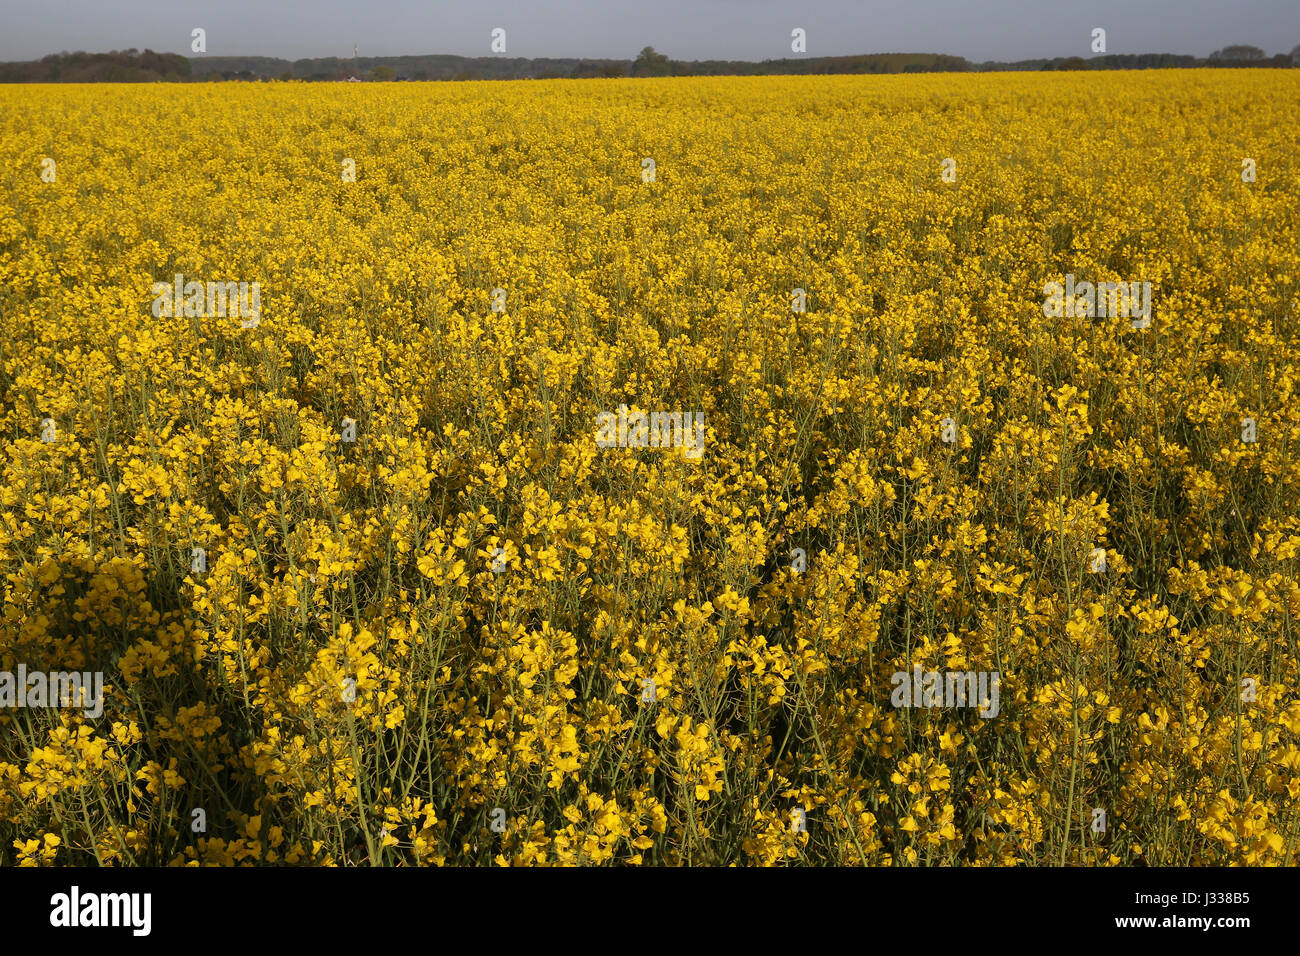 A field of Canola or rapeseed in Belgium. Yellow flowers. Stock Photo